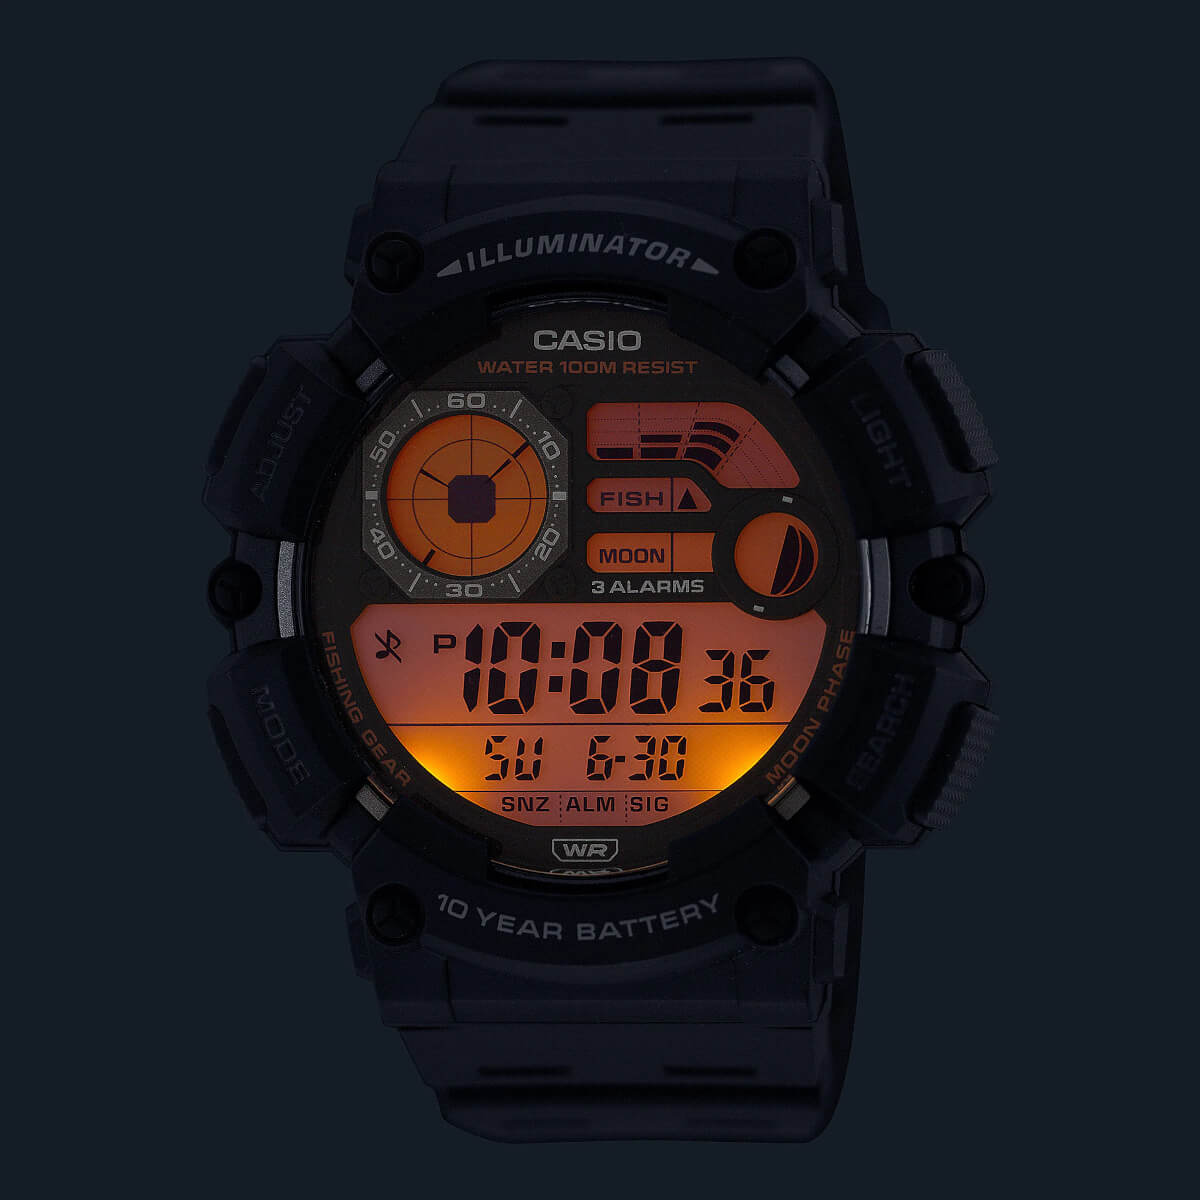 Casio updates Fishing Gear line with WS-1500H digital watch: 10-Year  Battery, Fishing Mode, Moon Data - G-Central G-Shock Fan Site